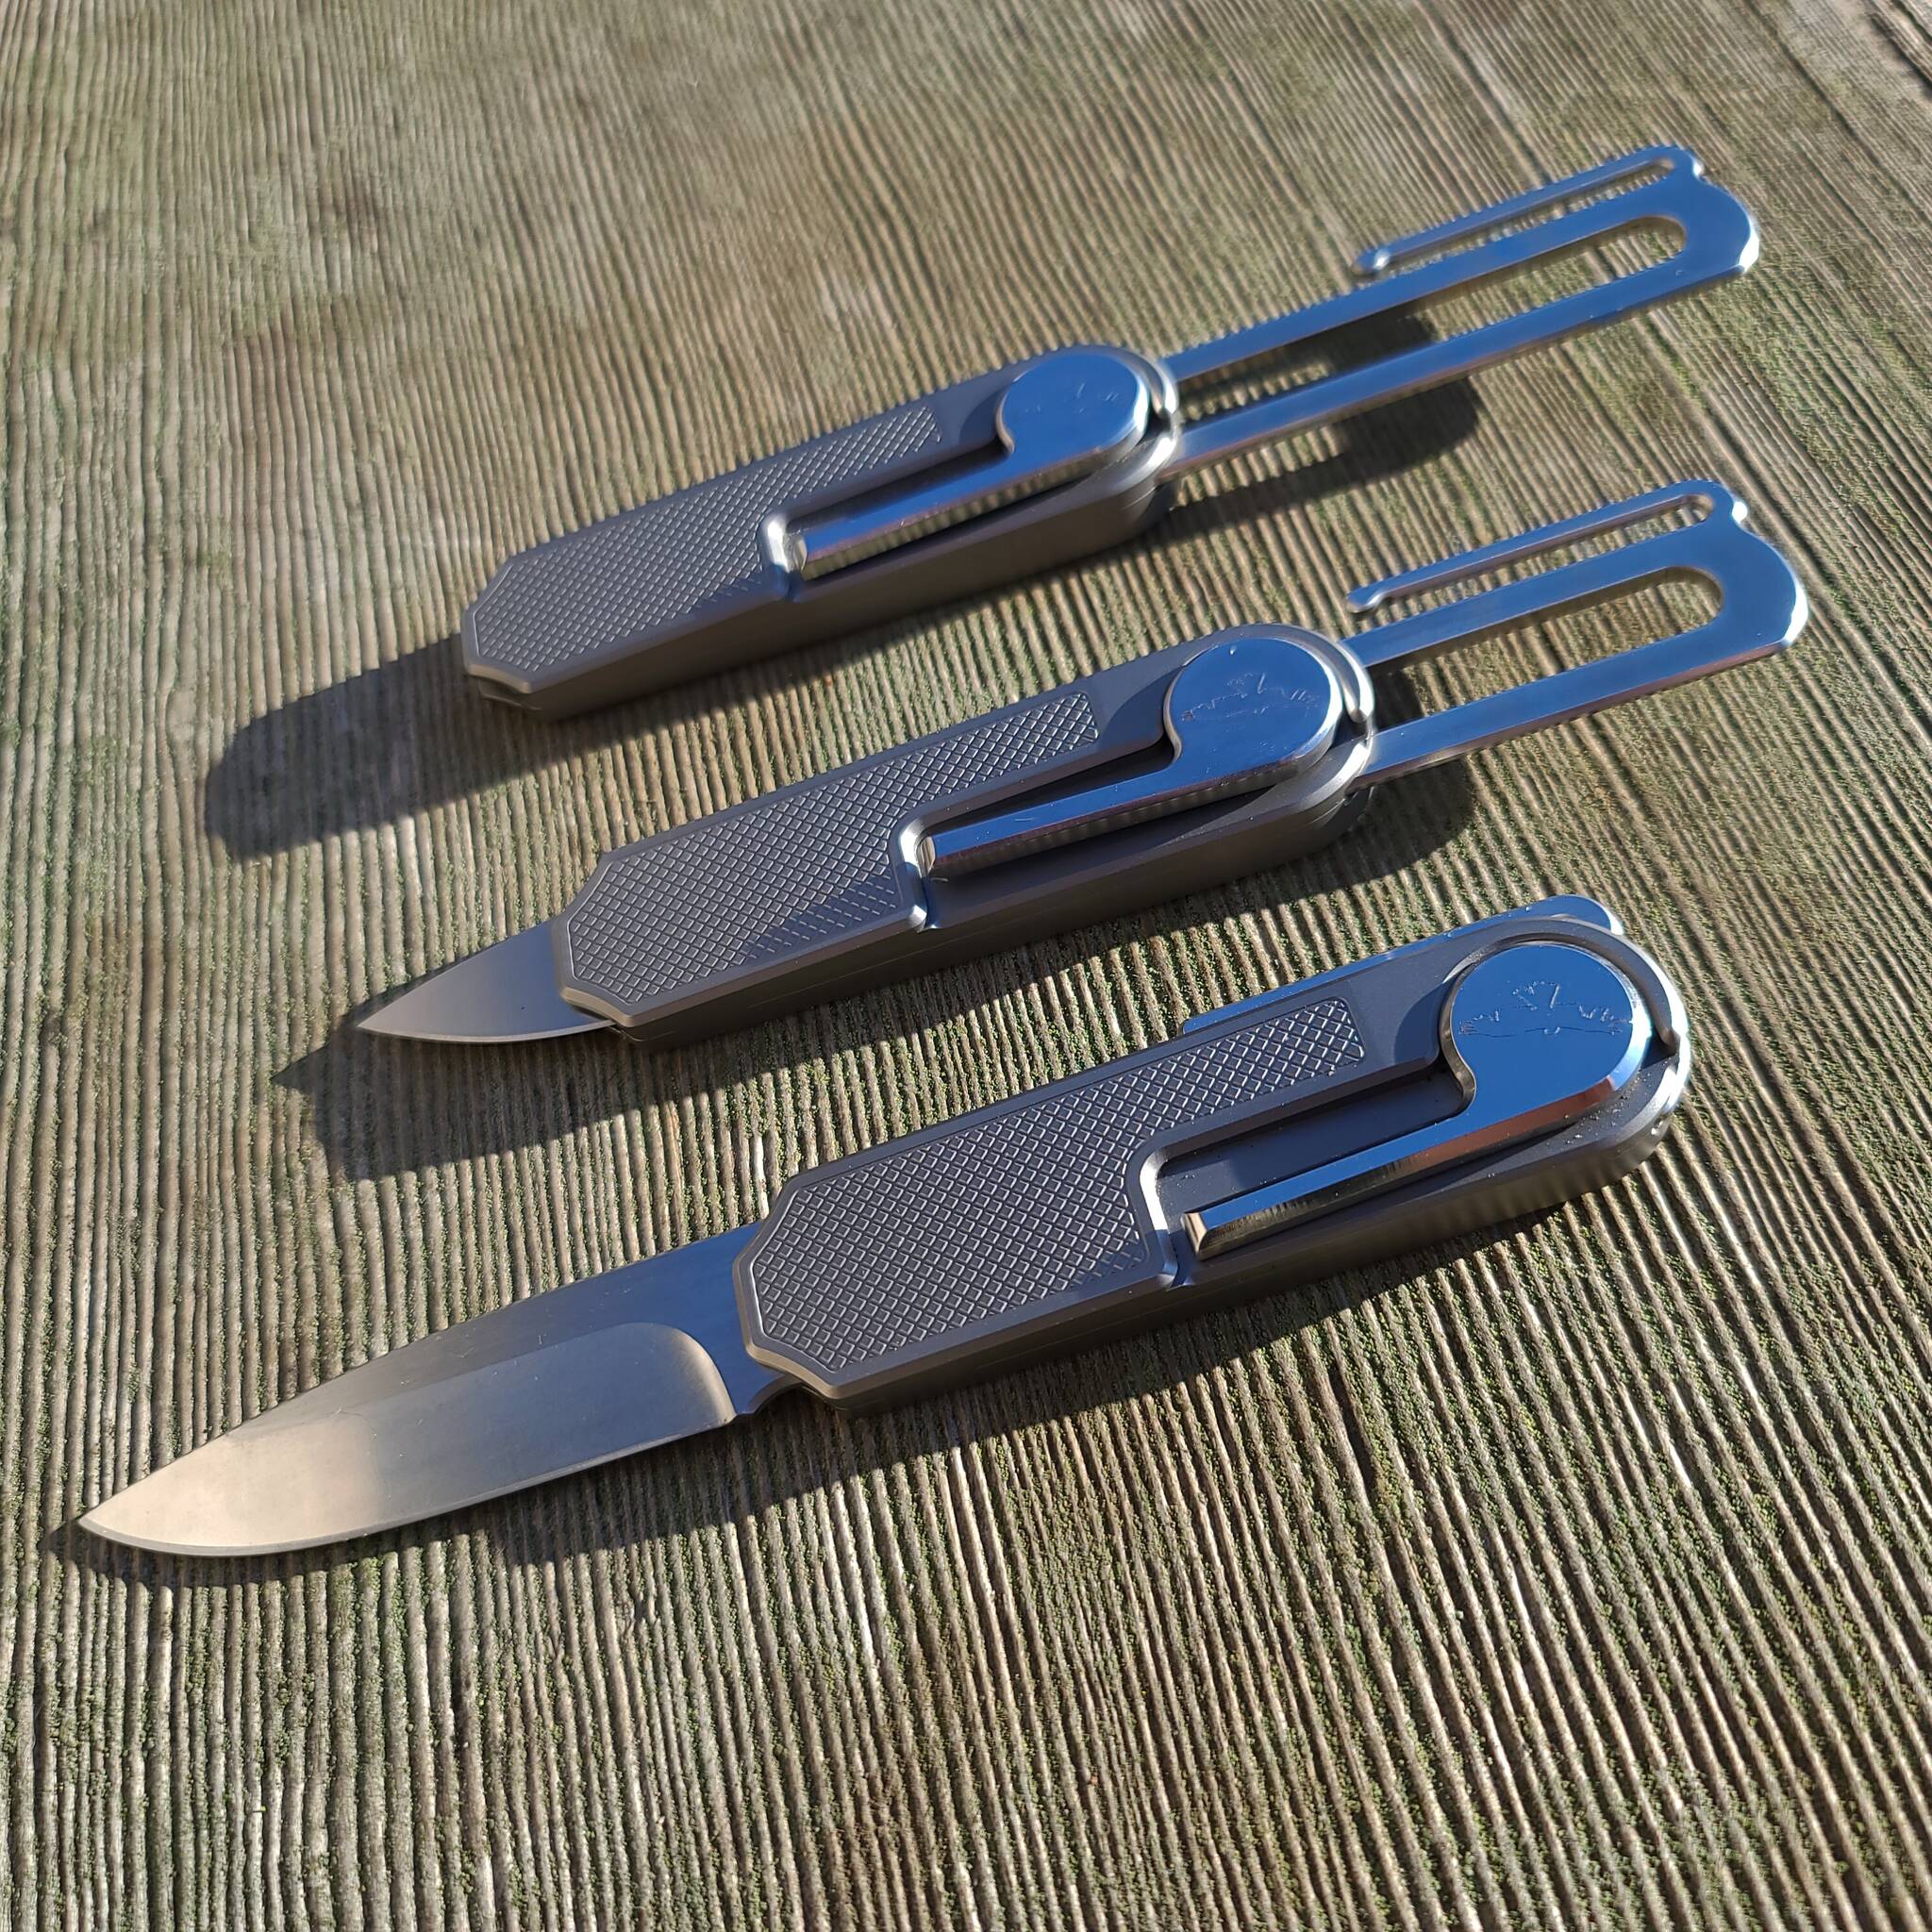 Unlike other everyday carry knives, the Raider Creek is composed of only five parts. A unique locking mechanism releases the 3-inch blade. (Photo provided)